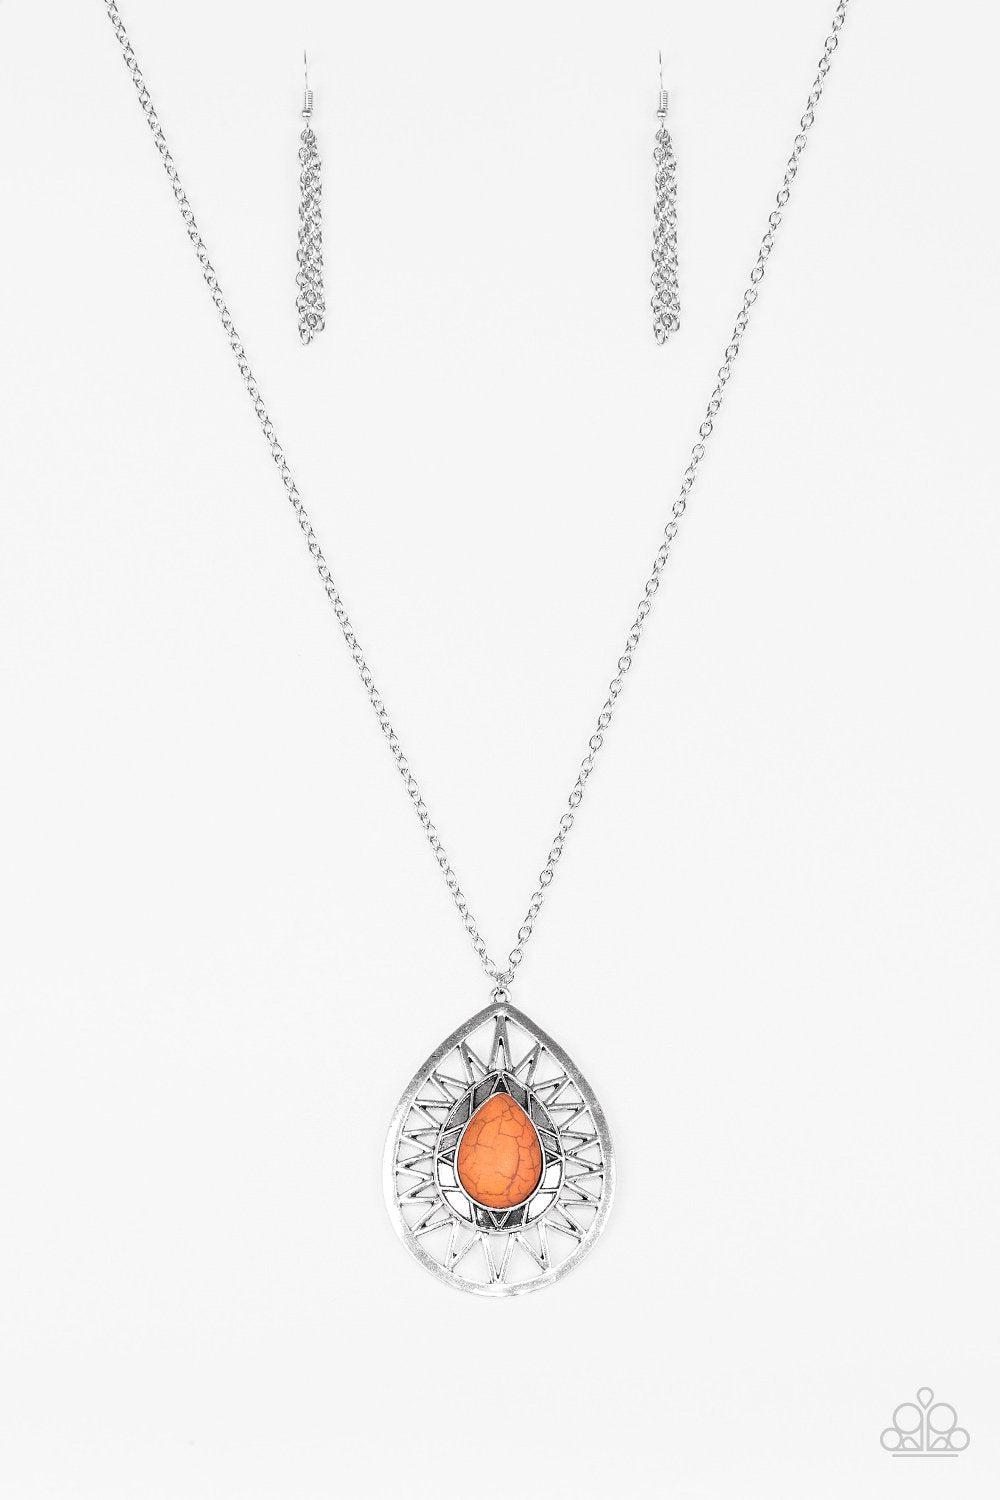 Summer Sunbeam Silver and Orange Stone Necklace - Paparazzi Accessories-CarasShop.com - $5 Jewelry by Cara Jewels